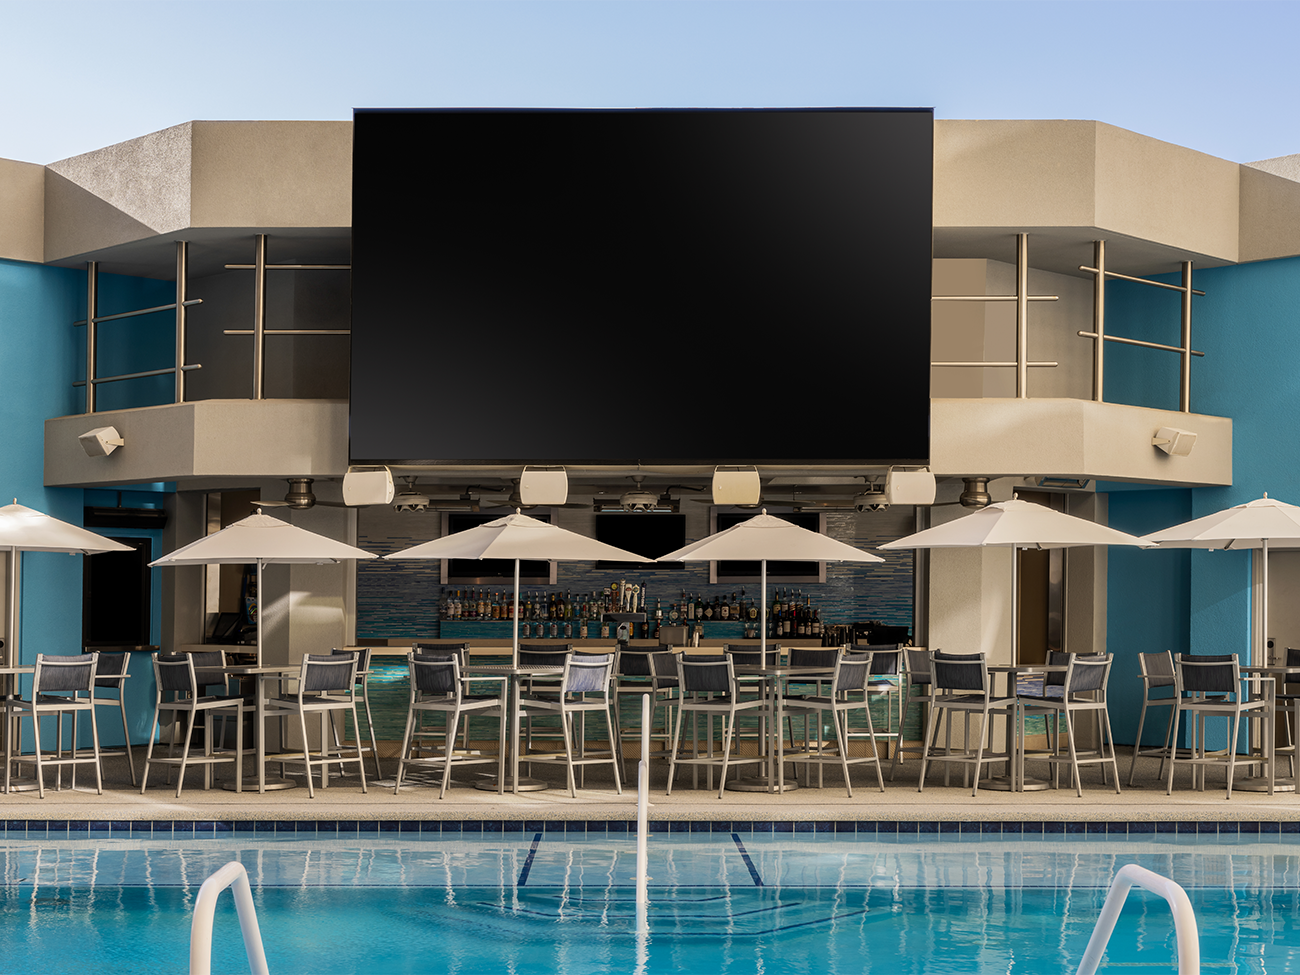 5th Floor Outdoor Pool and Bar & Grill